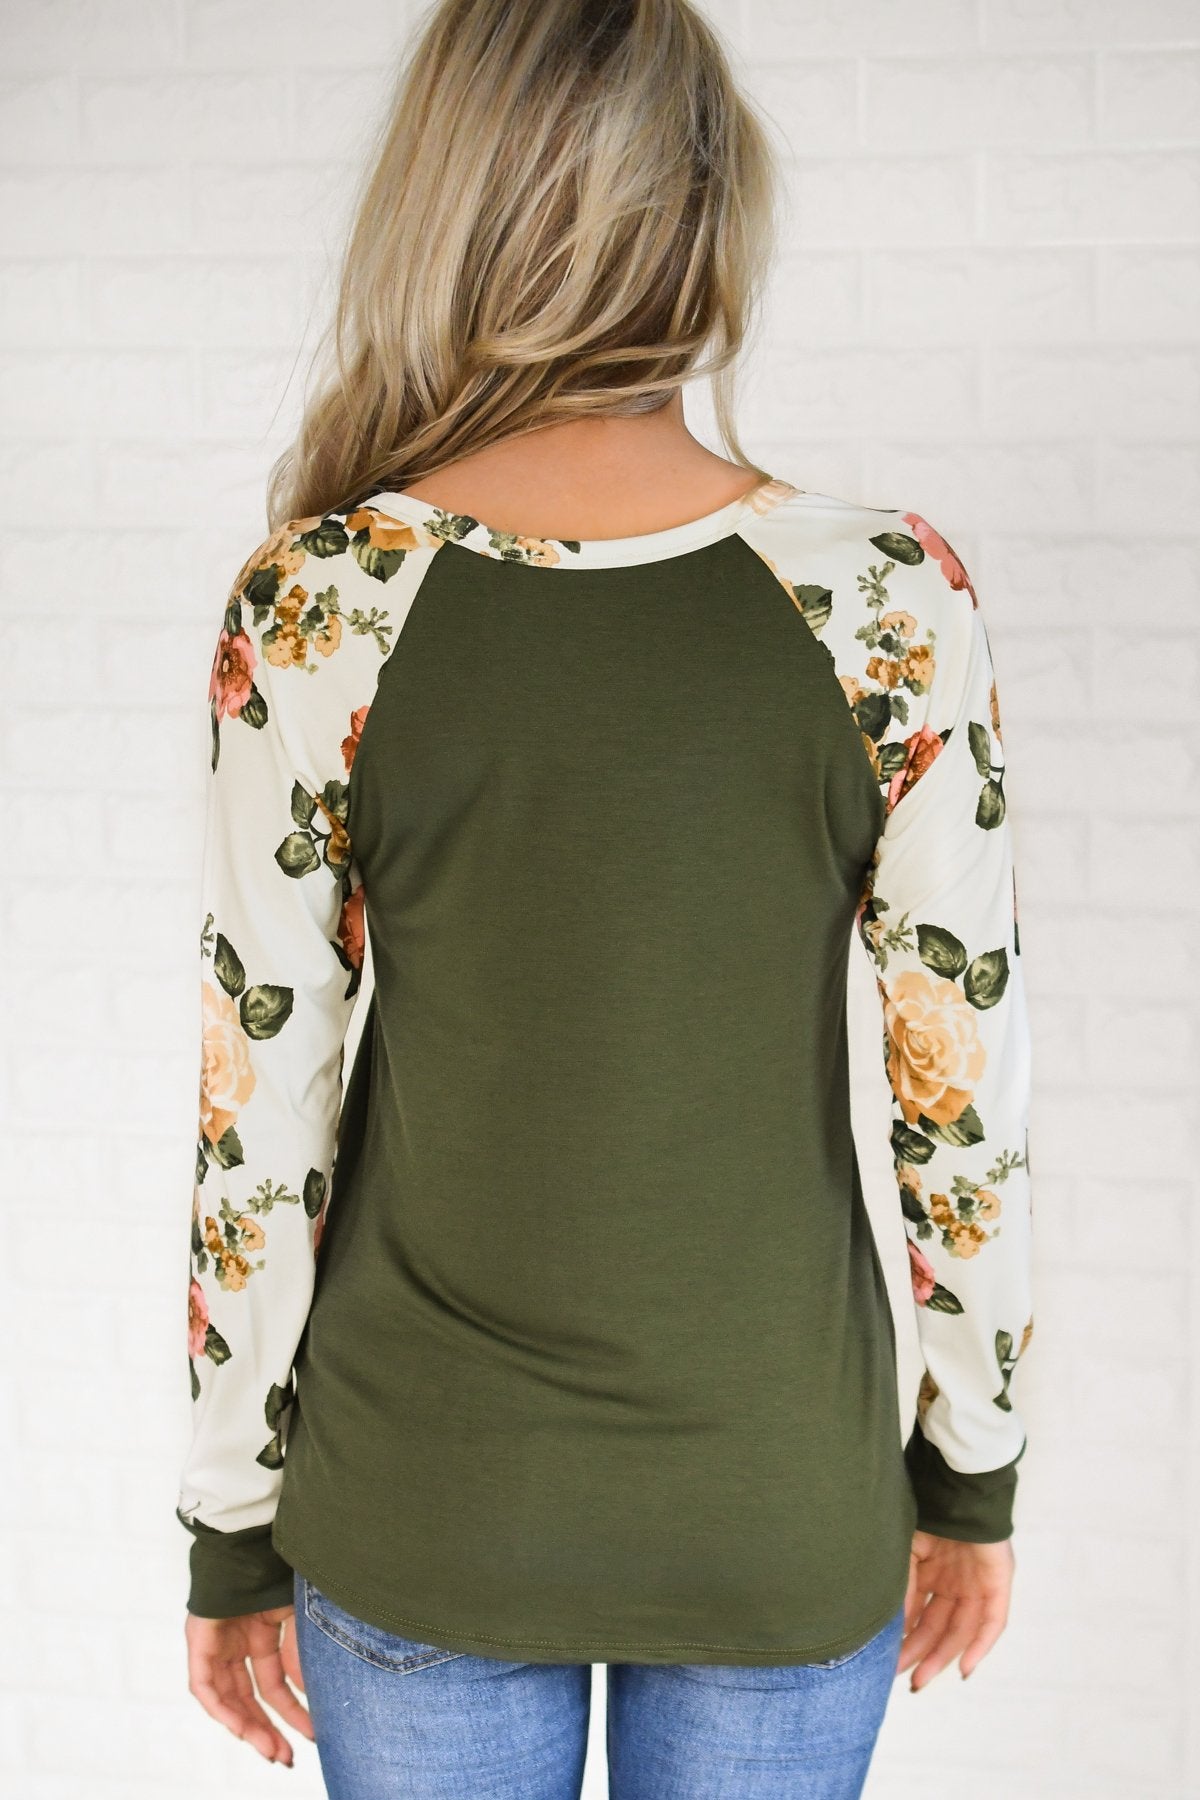 The One for Me Floral Sleeve Olive Top